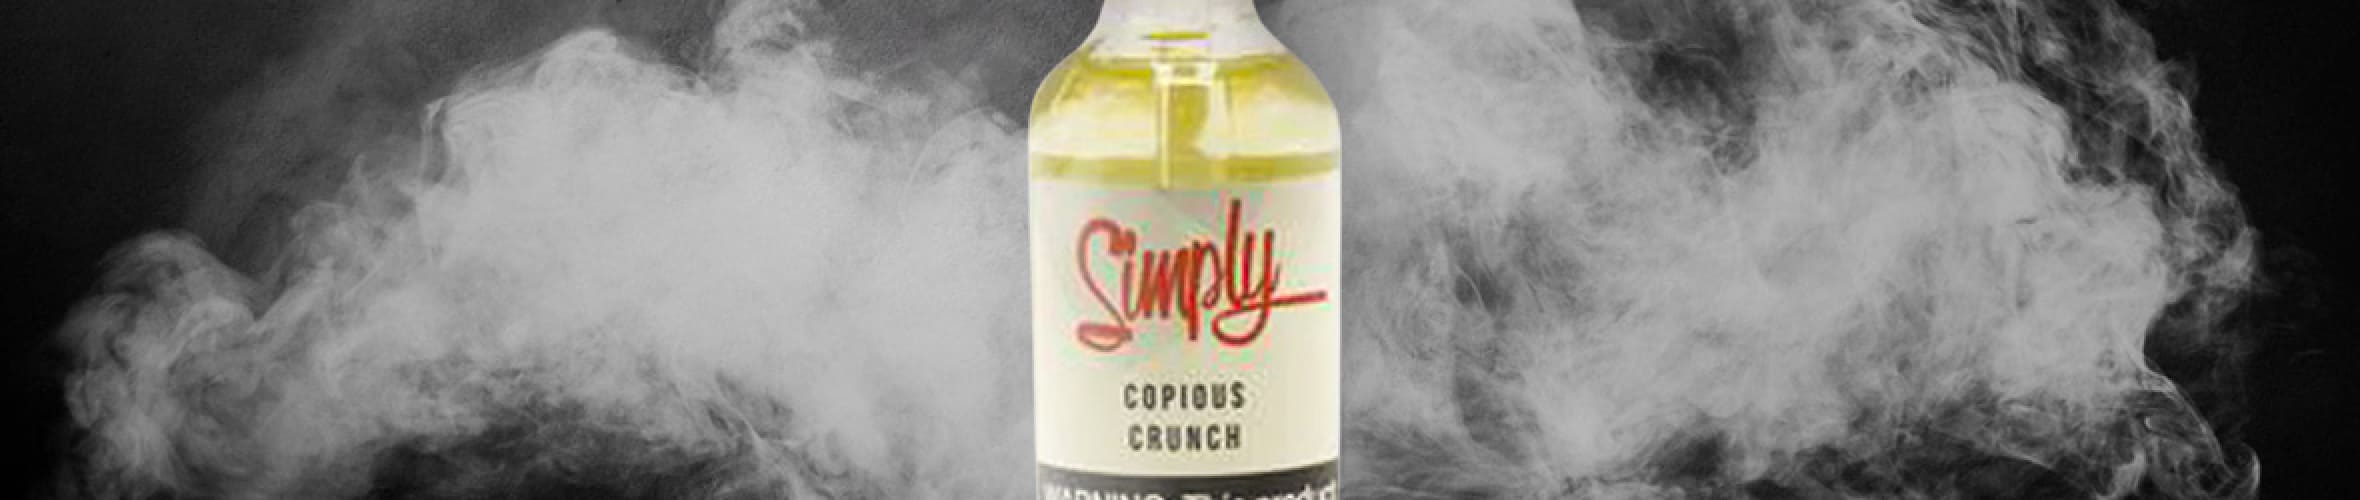 copious crunch by simply e-juice review